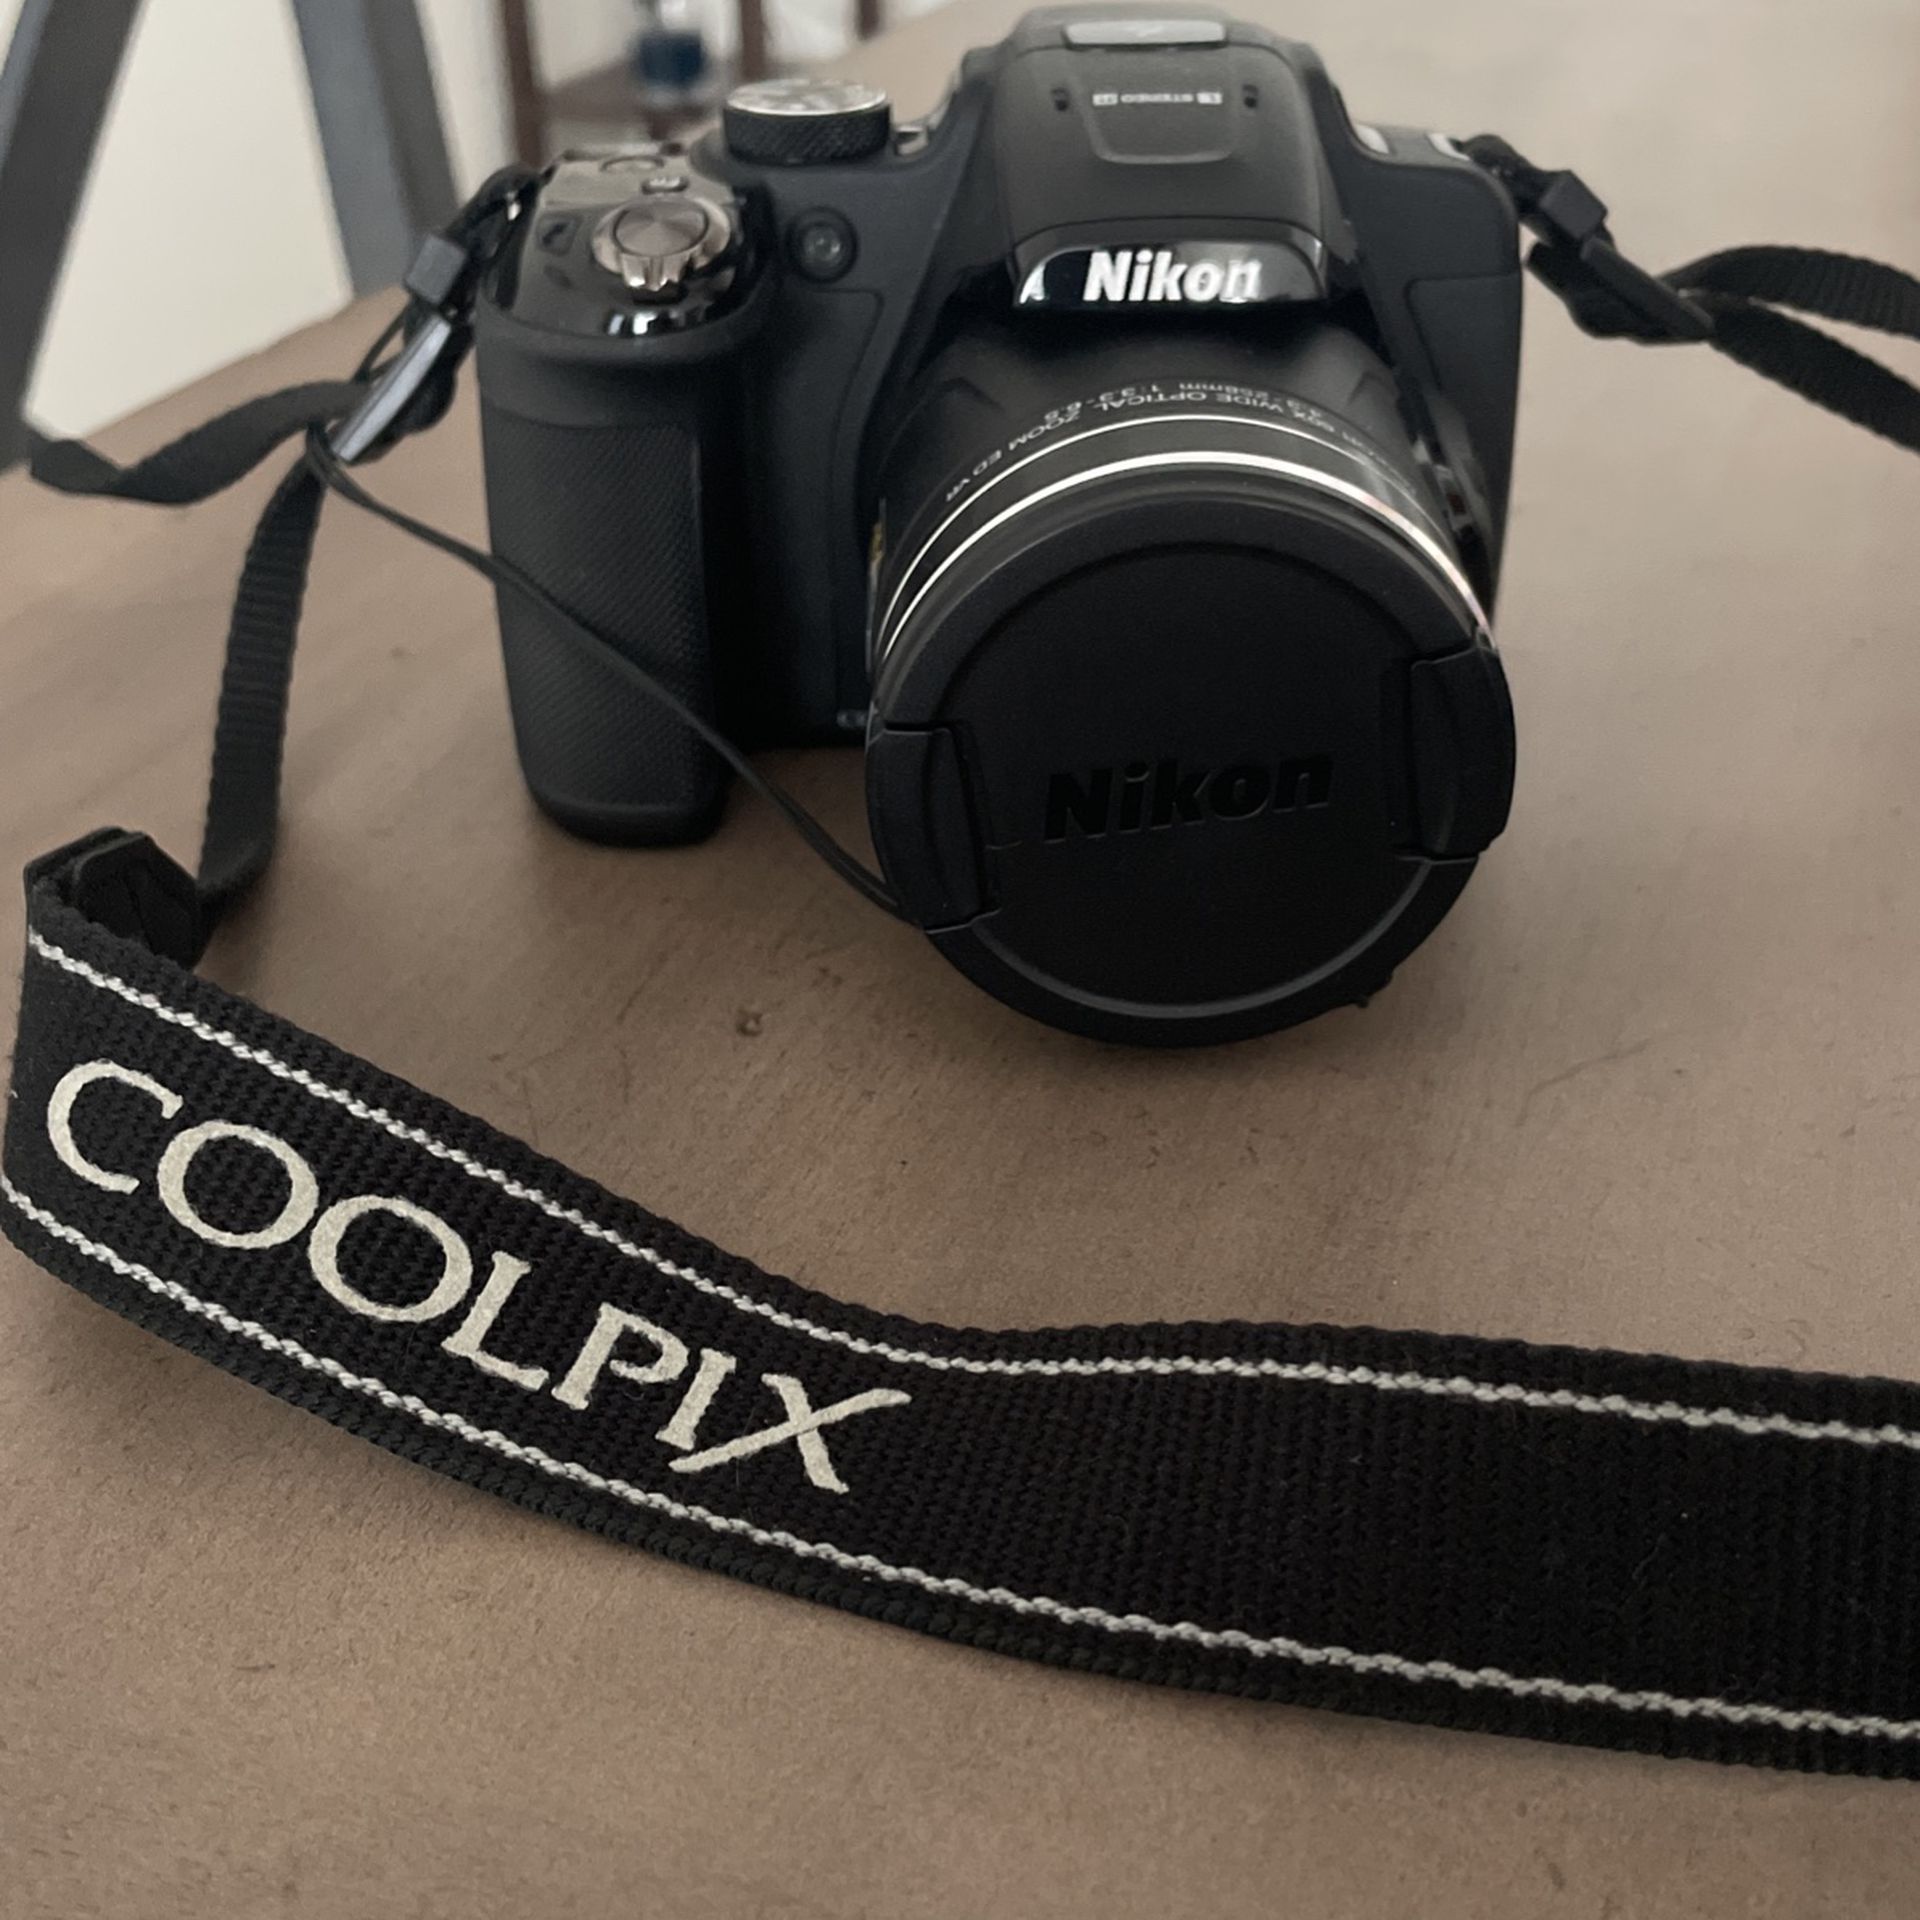 Nikon Coolpix P610 *with neck strap, case, and SD card* for Sale in